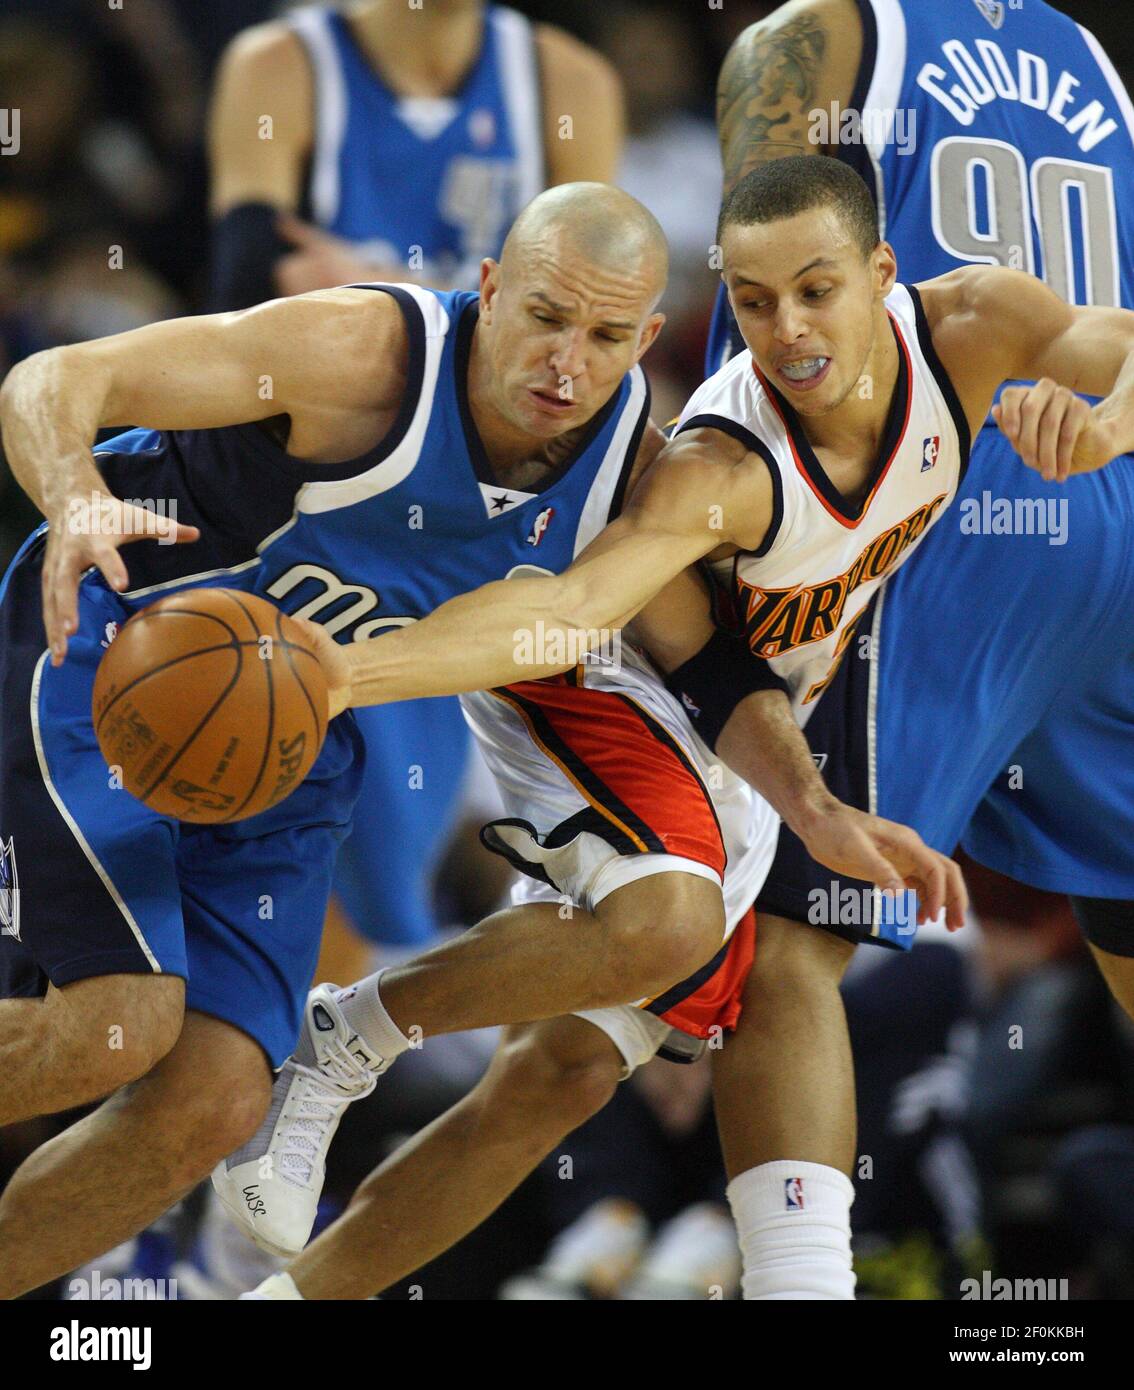 Golden State Warriors&apos; Stephen Curry, right, steals the ball from  Dallas Mavericks&apos; Jason Kidd during the first quarter of an NBA  basketball game, Monday, February 8, 2010, at Oracle Arena in Oakland,